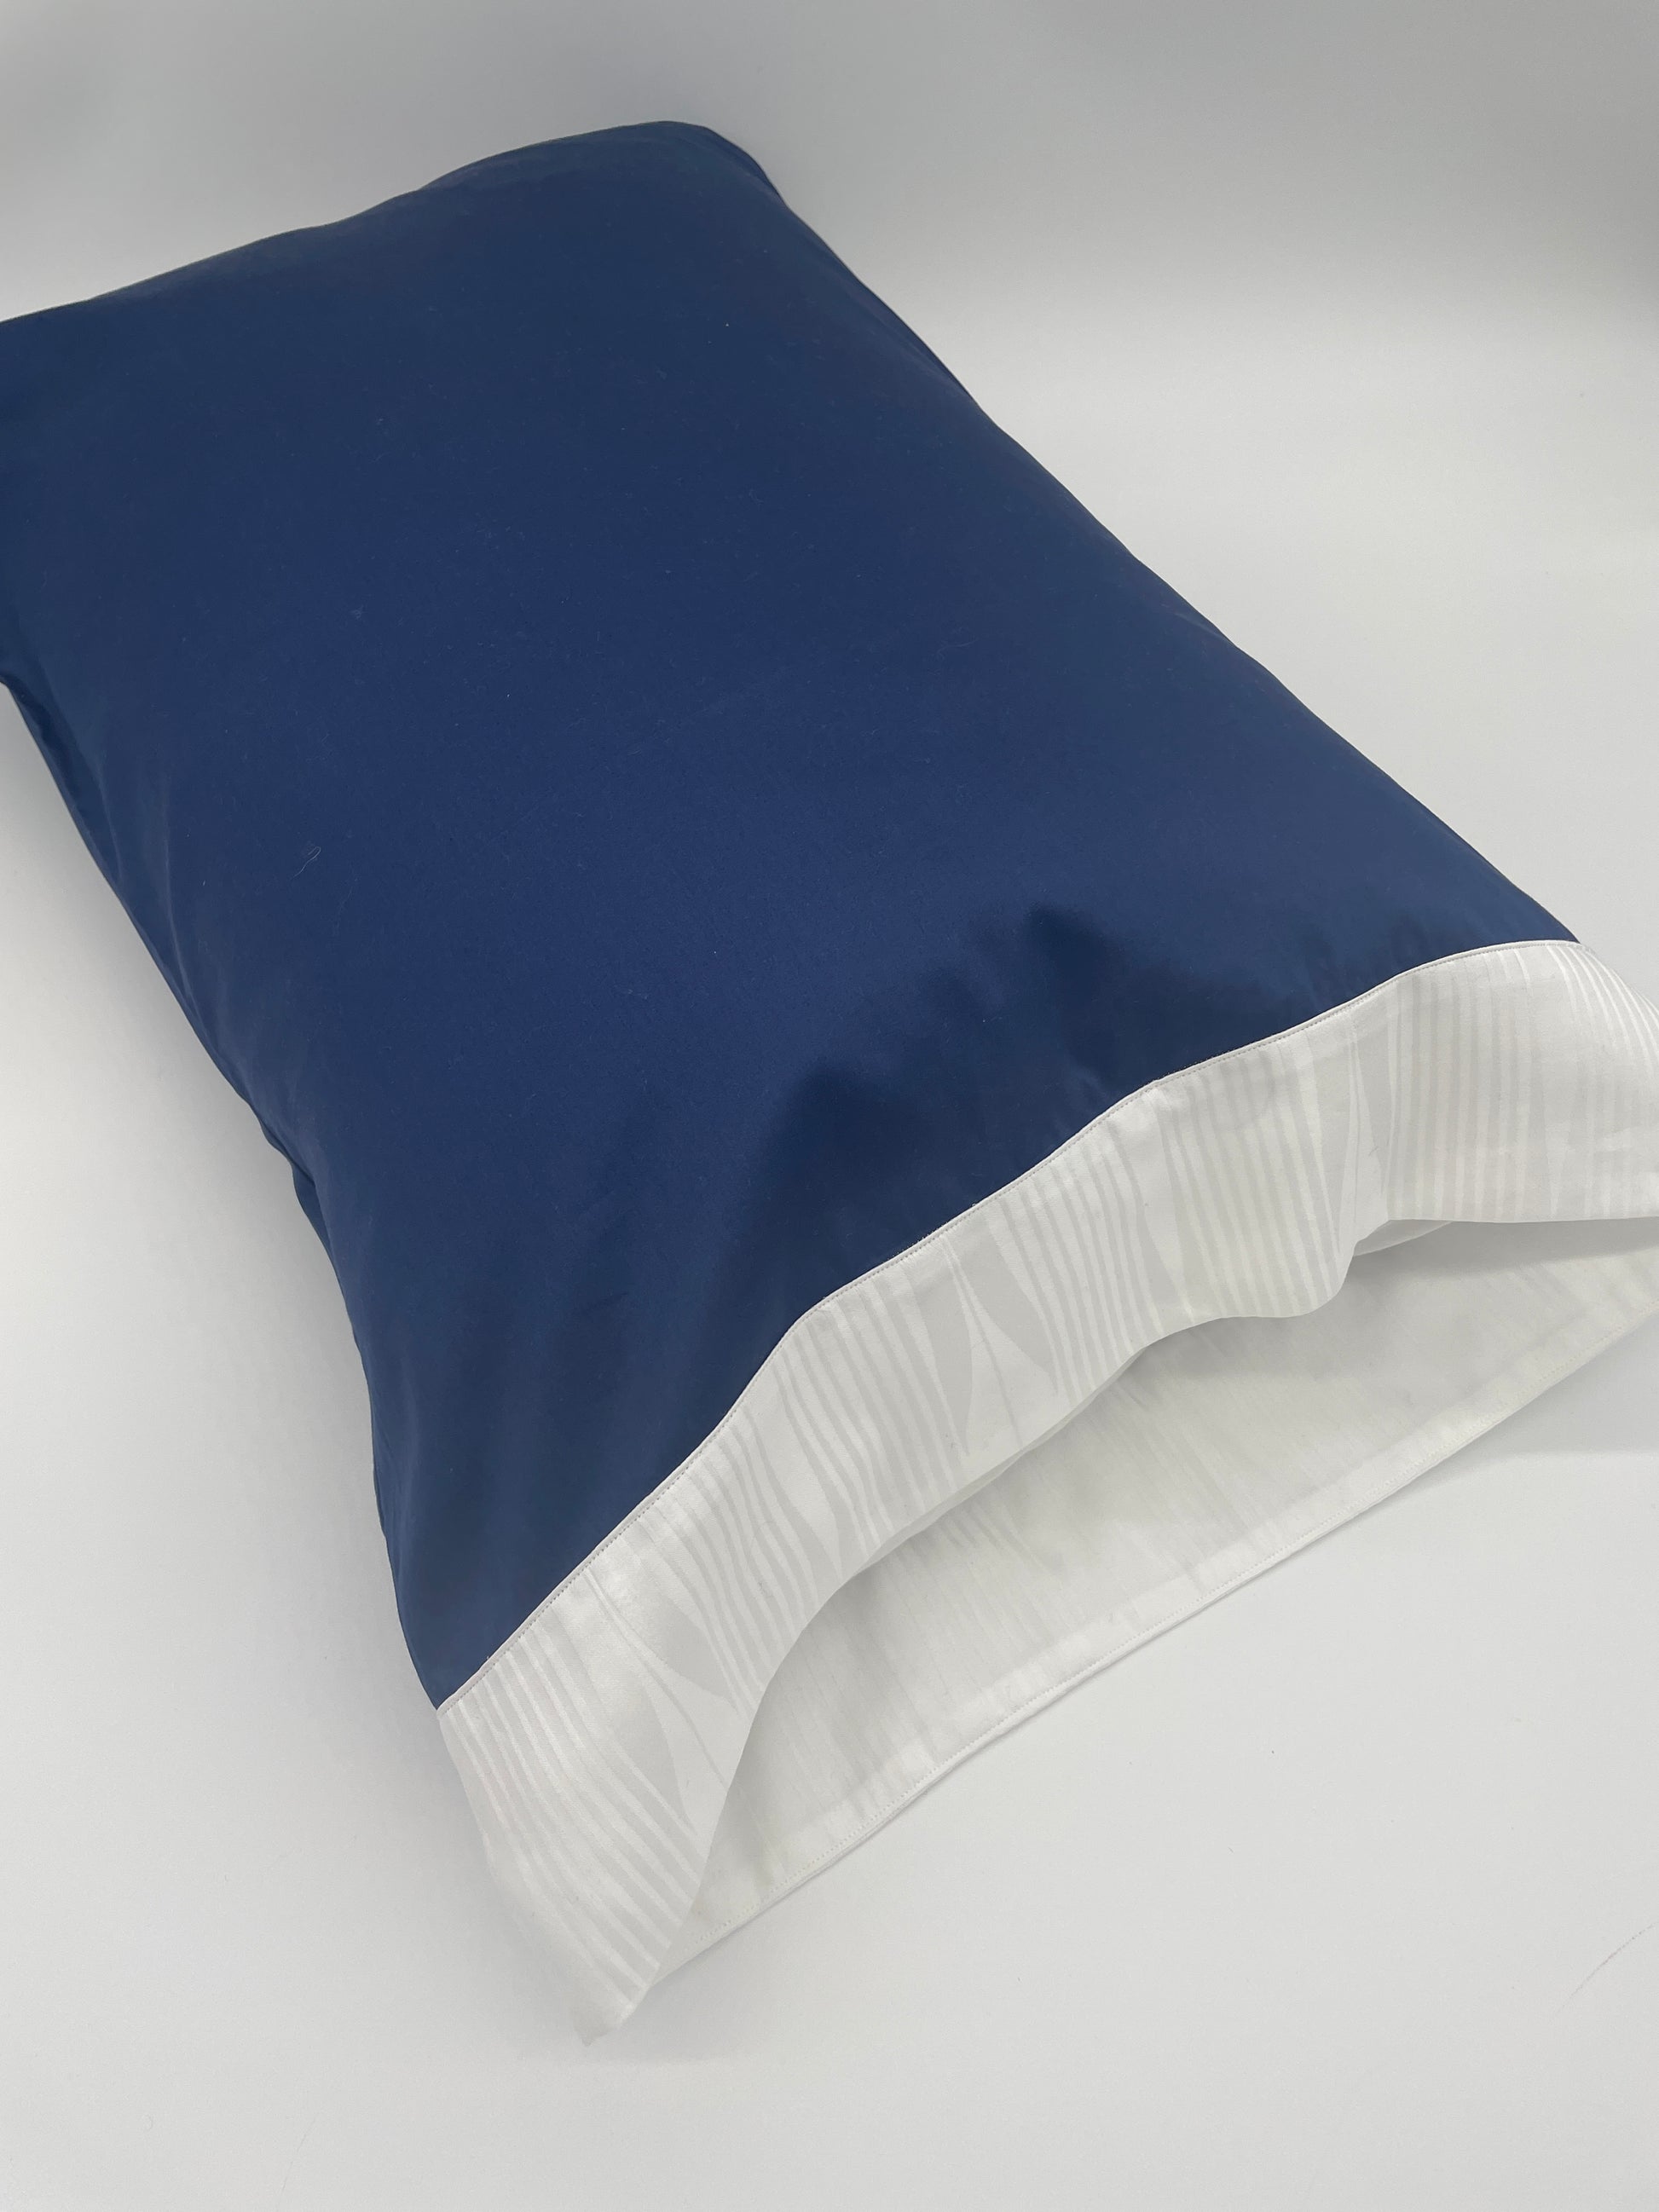 Kearsley Pillowcase on pillow.  Navy Soleil 300 thread count Sateen with a white on white Soleil jacquard border (Soleil is an abstracted sun ray jacquard border in white on white).  Made in Italy.  Fine linens.  Daily Essentials.